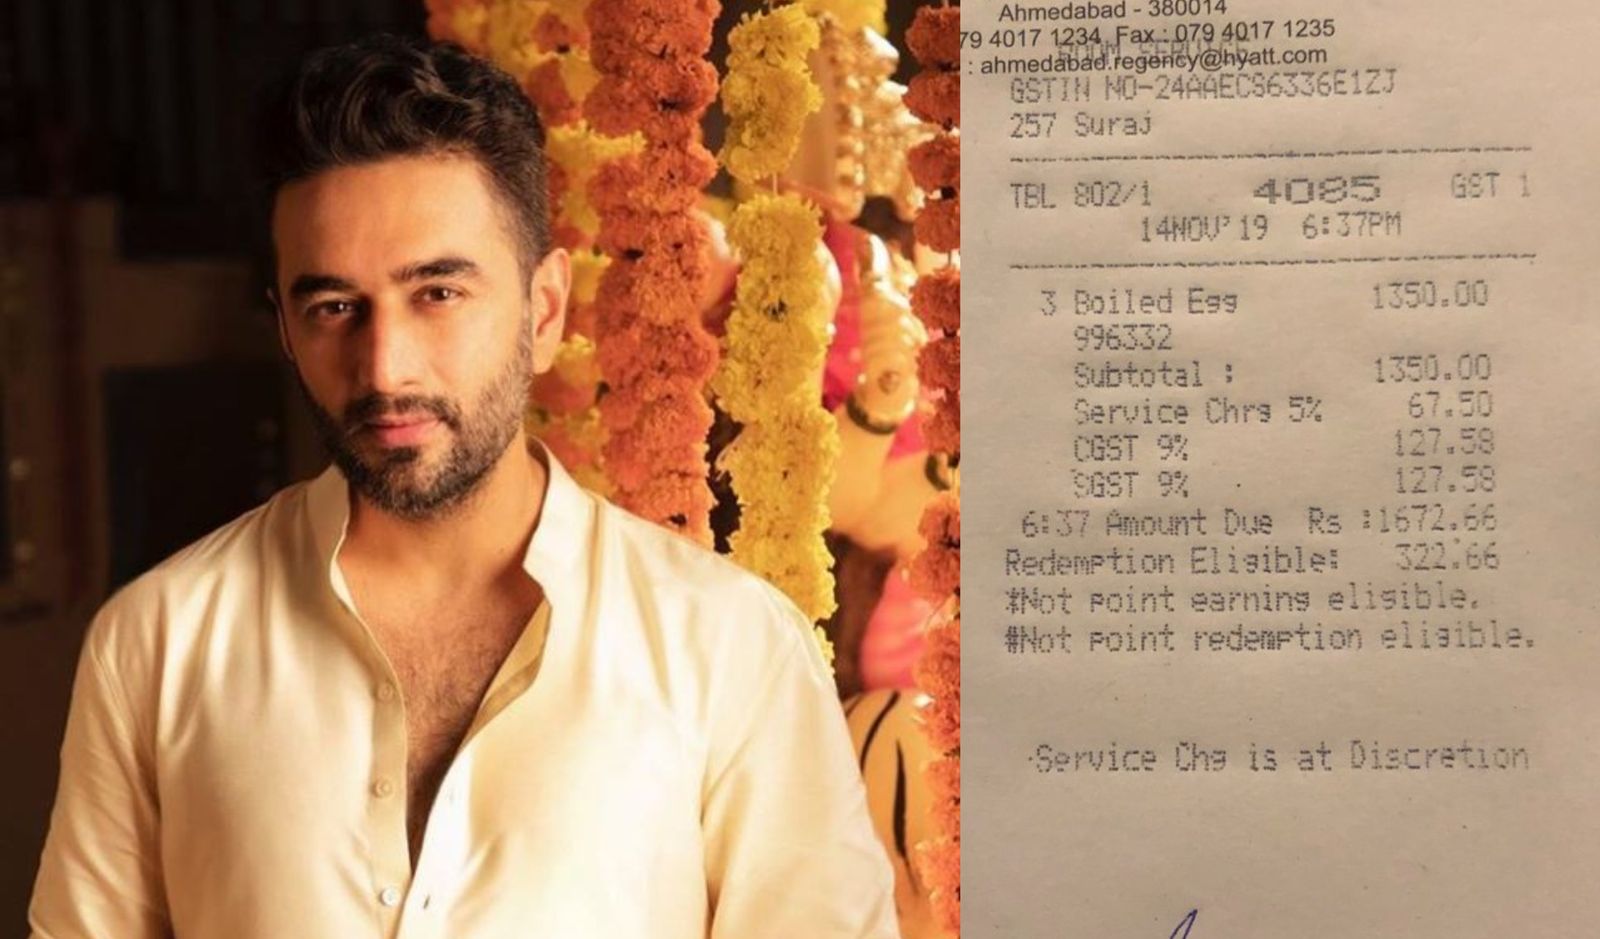 After Rahul Bose, Music Composer Shekhar Charged Rs. 1672 For Three Egg Whites At Ahmedabad Hotel, Calls It An  ‘Eggxorbitant Meal'